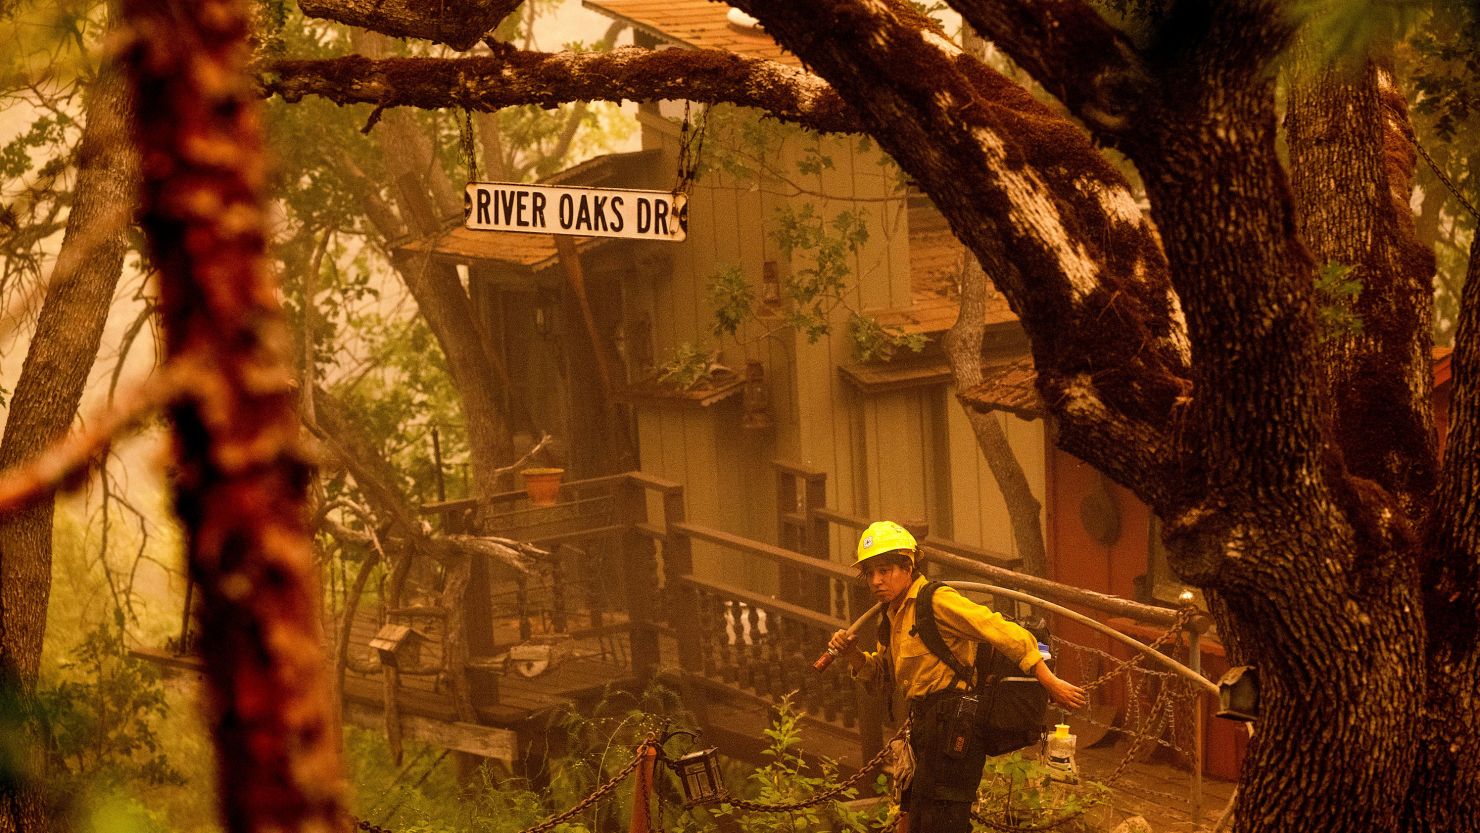 A firefighter battling the McKinney Fire in California protects a cabin in the Klamath National Forest Sunday.